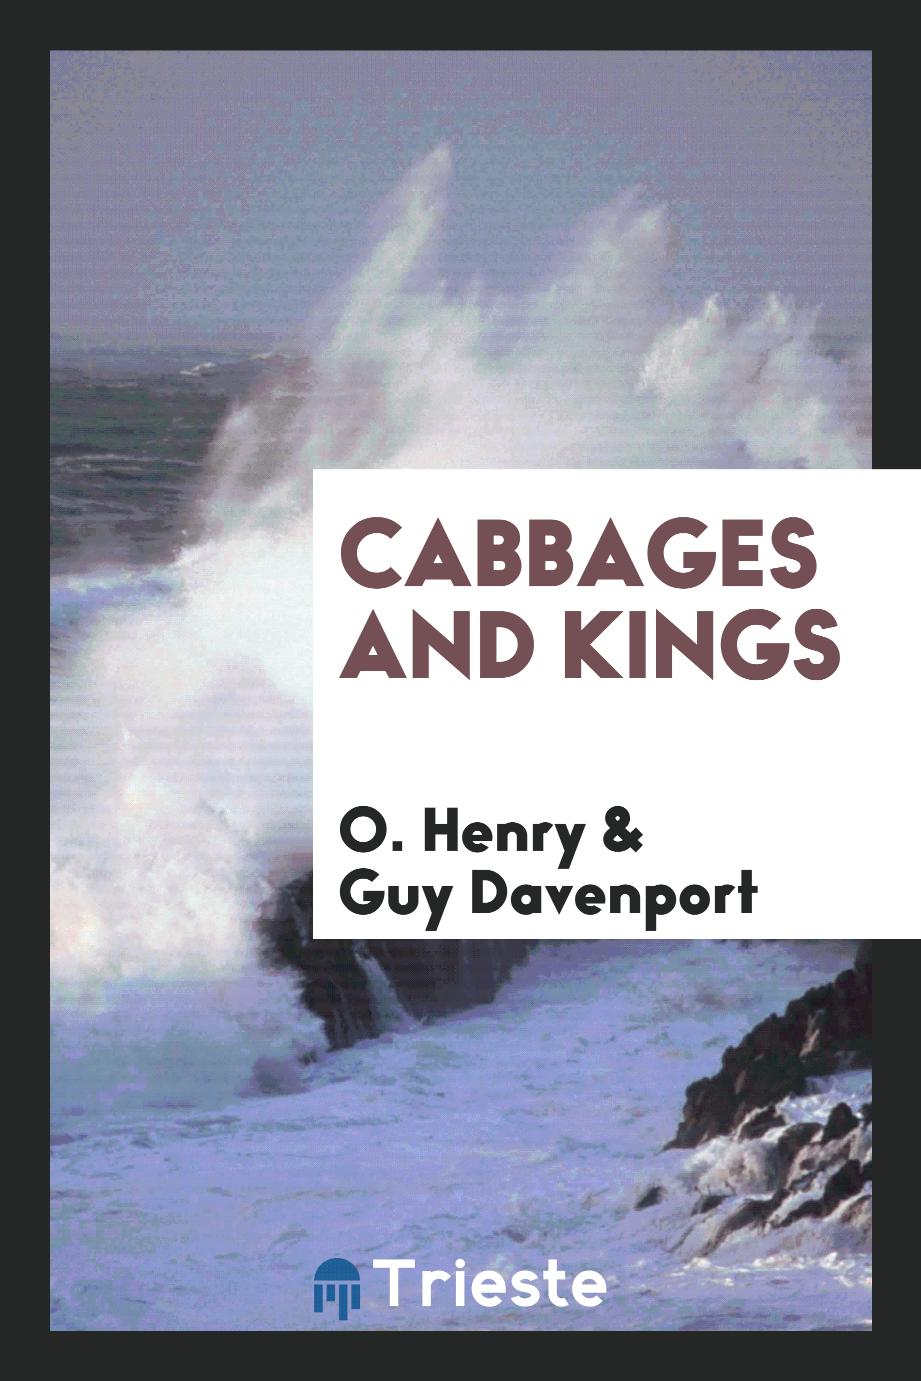 Cabbages and kings